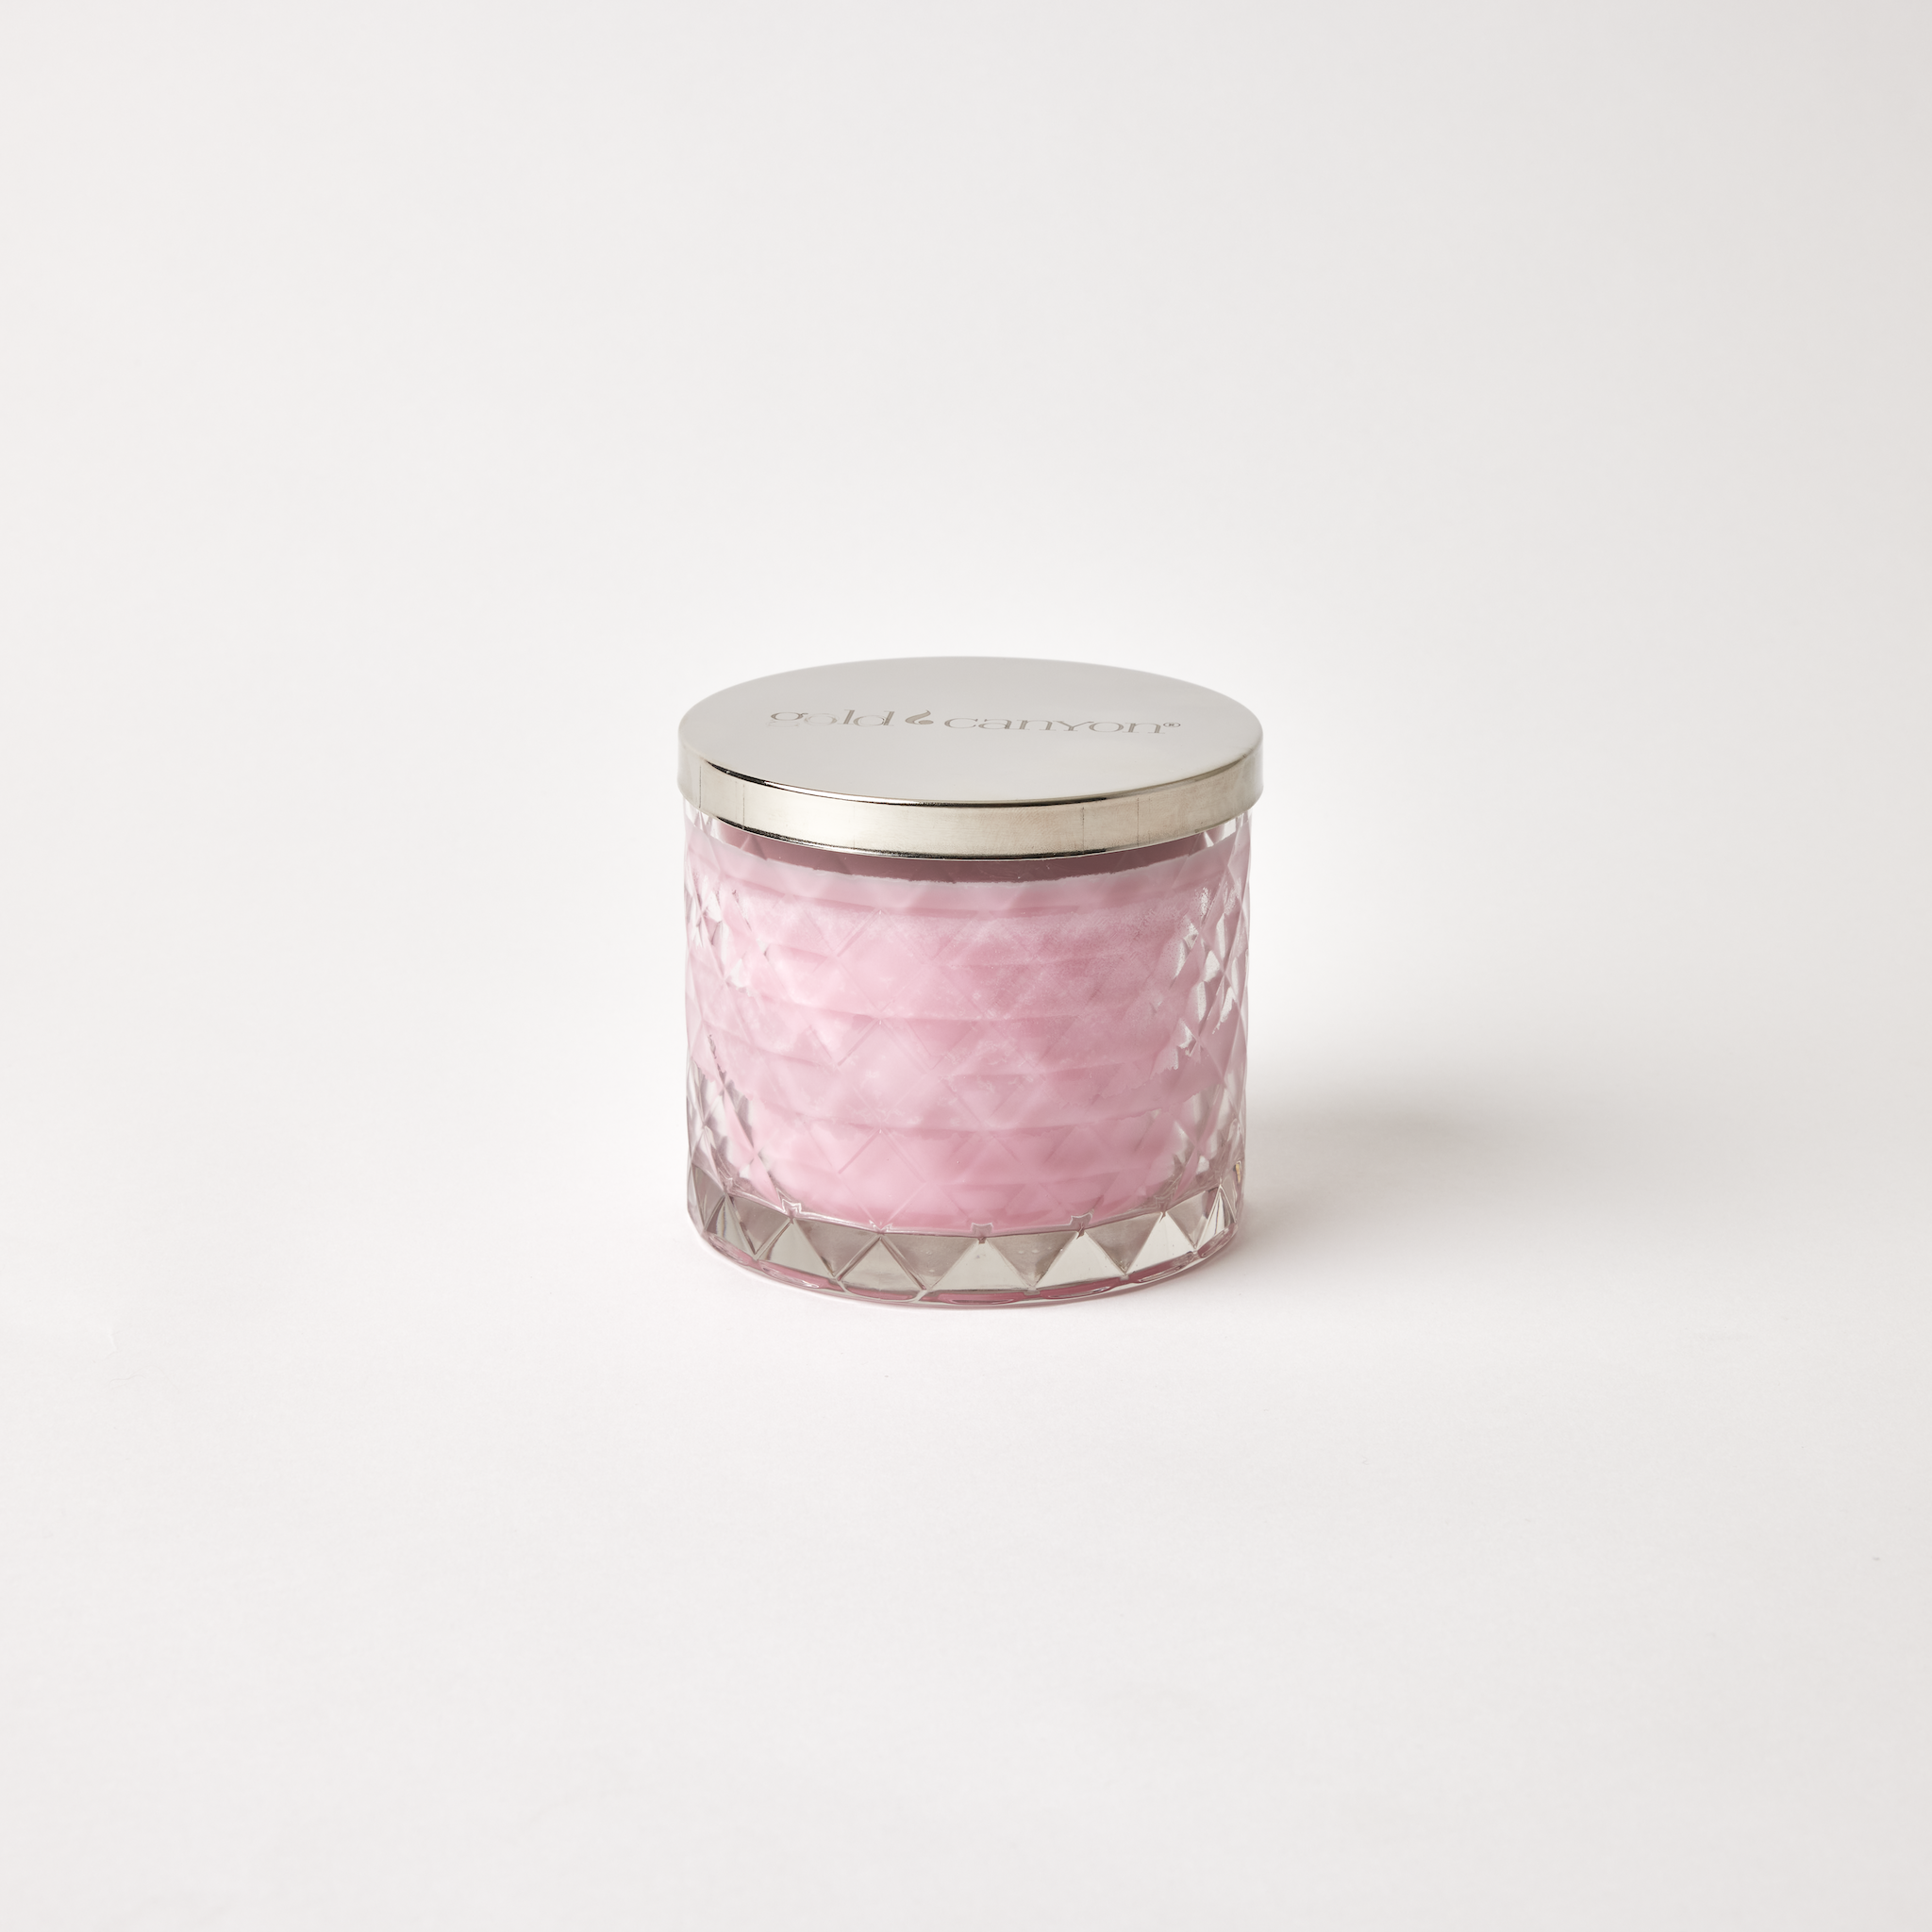  Gold Canyon Sweet Pea Scented Soy Candle 